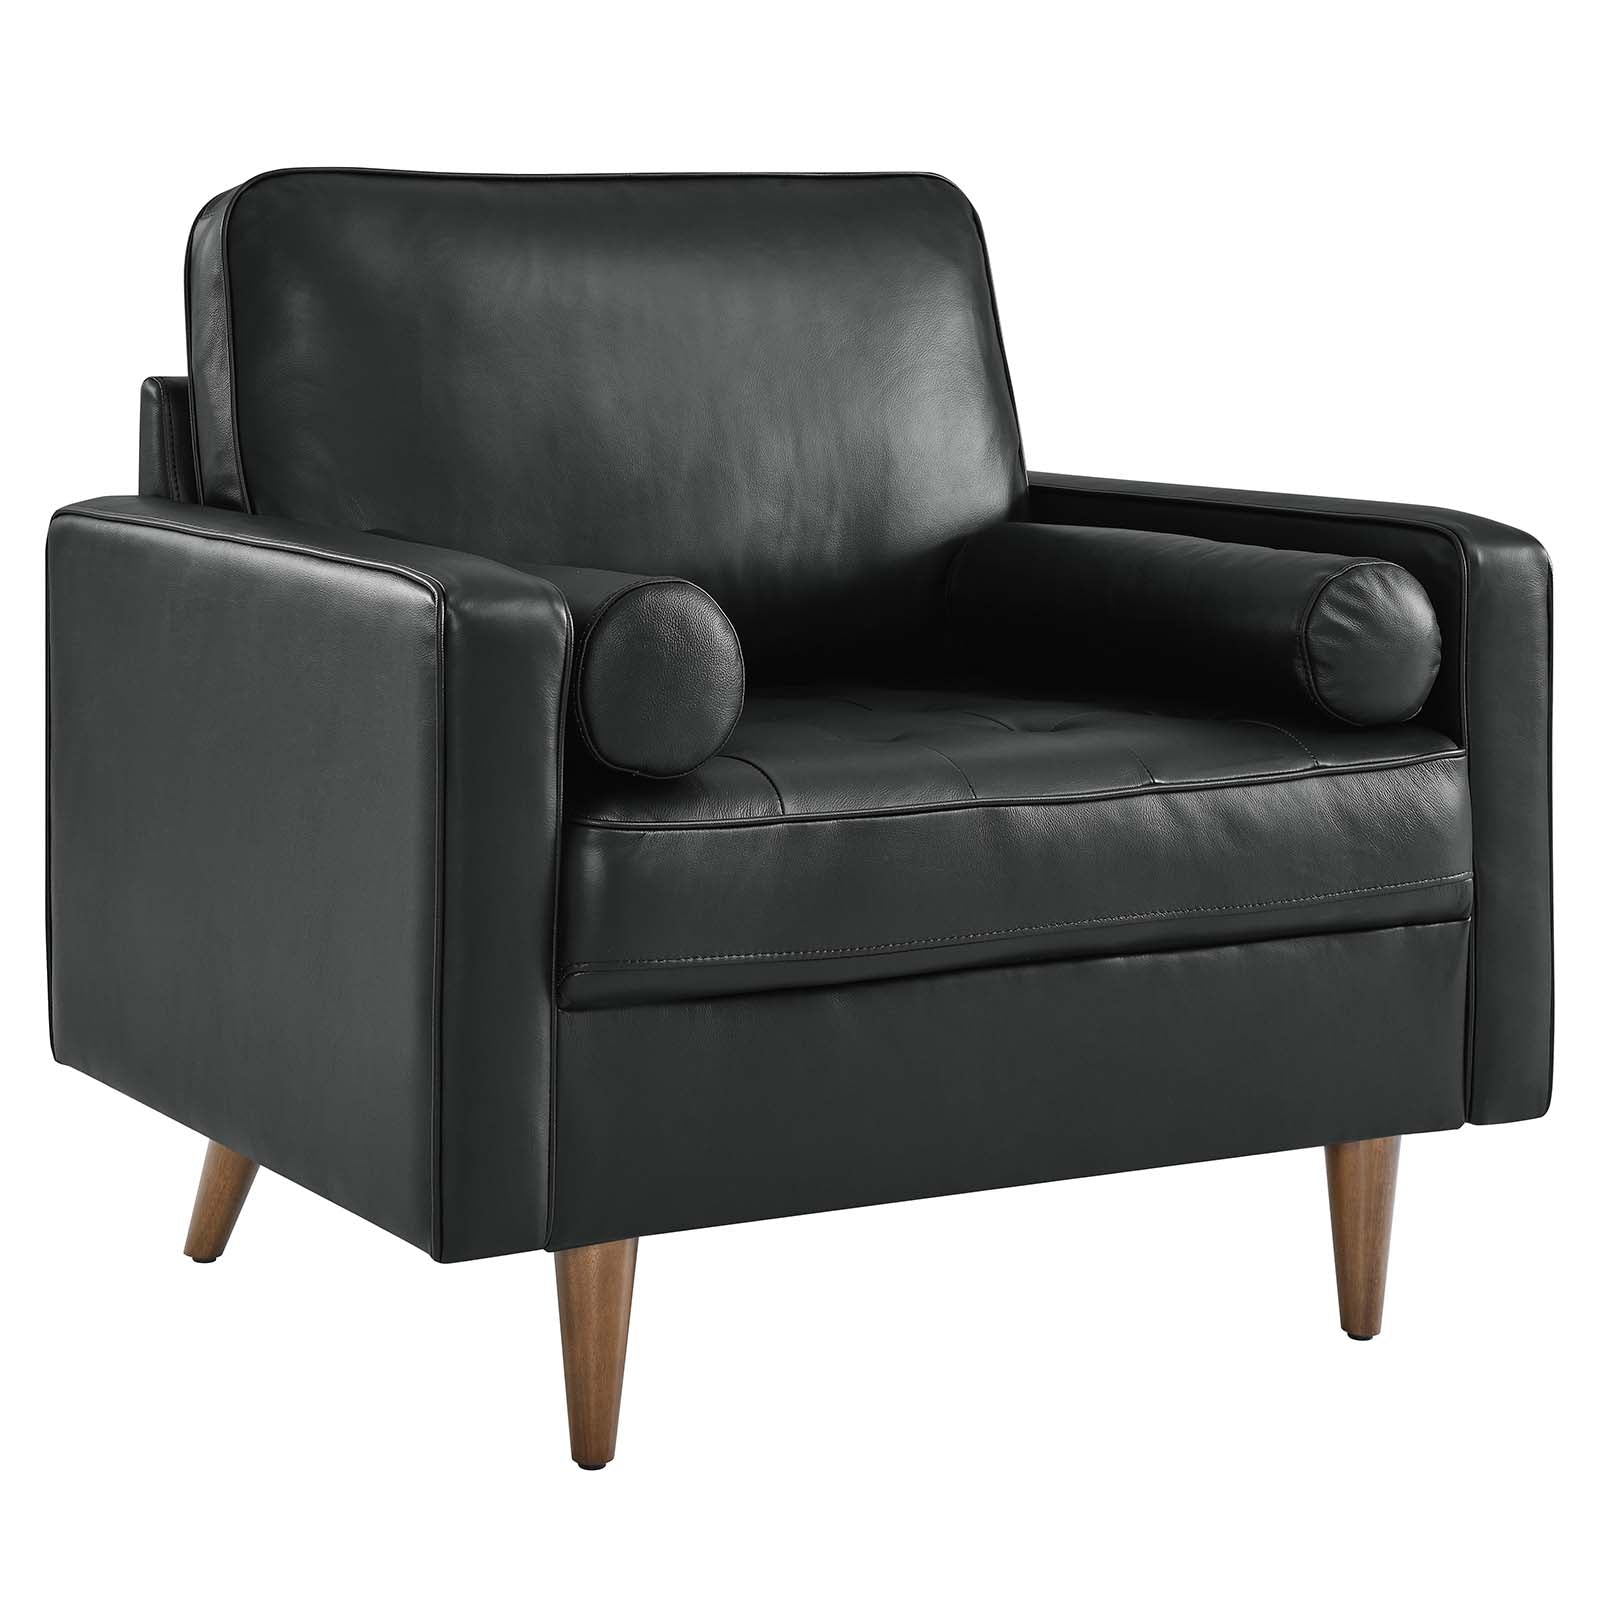 Modway Accent Chairs - Valour Leather Armchair Black